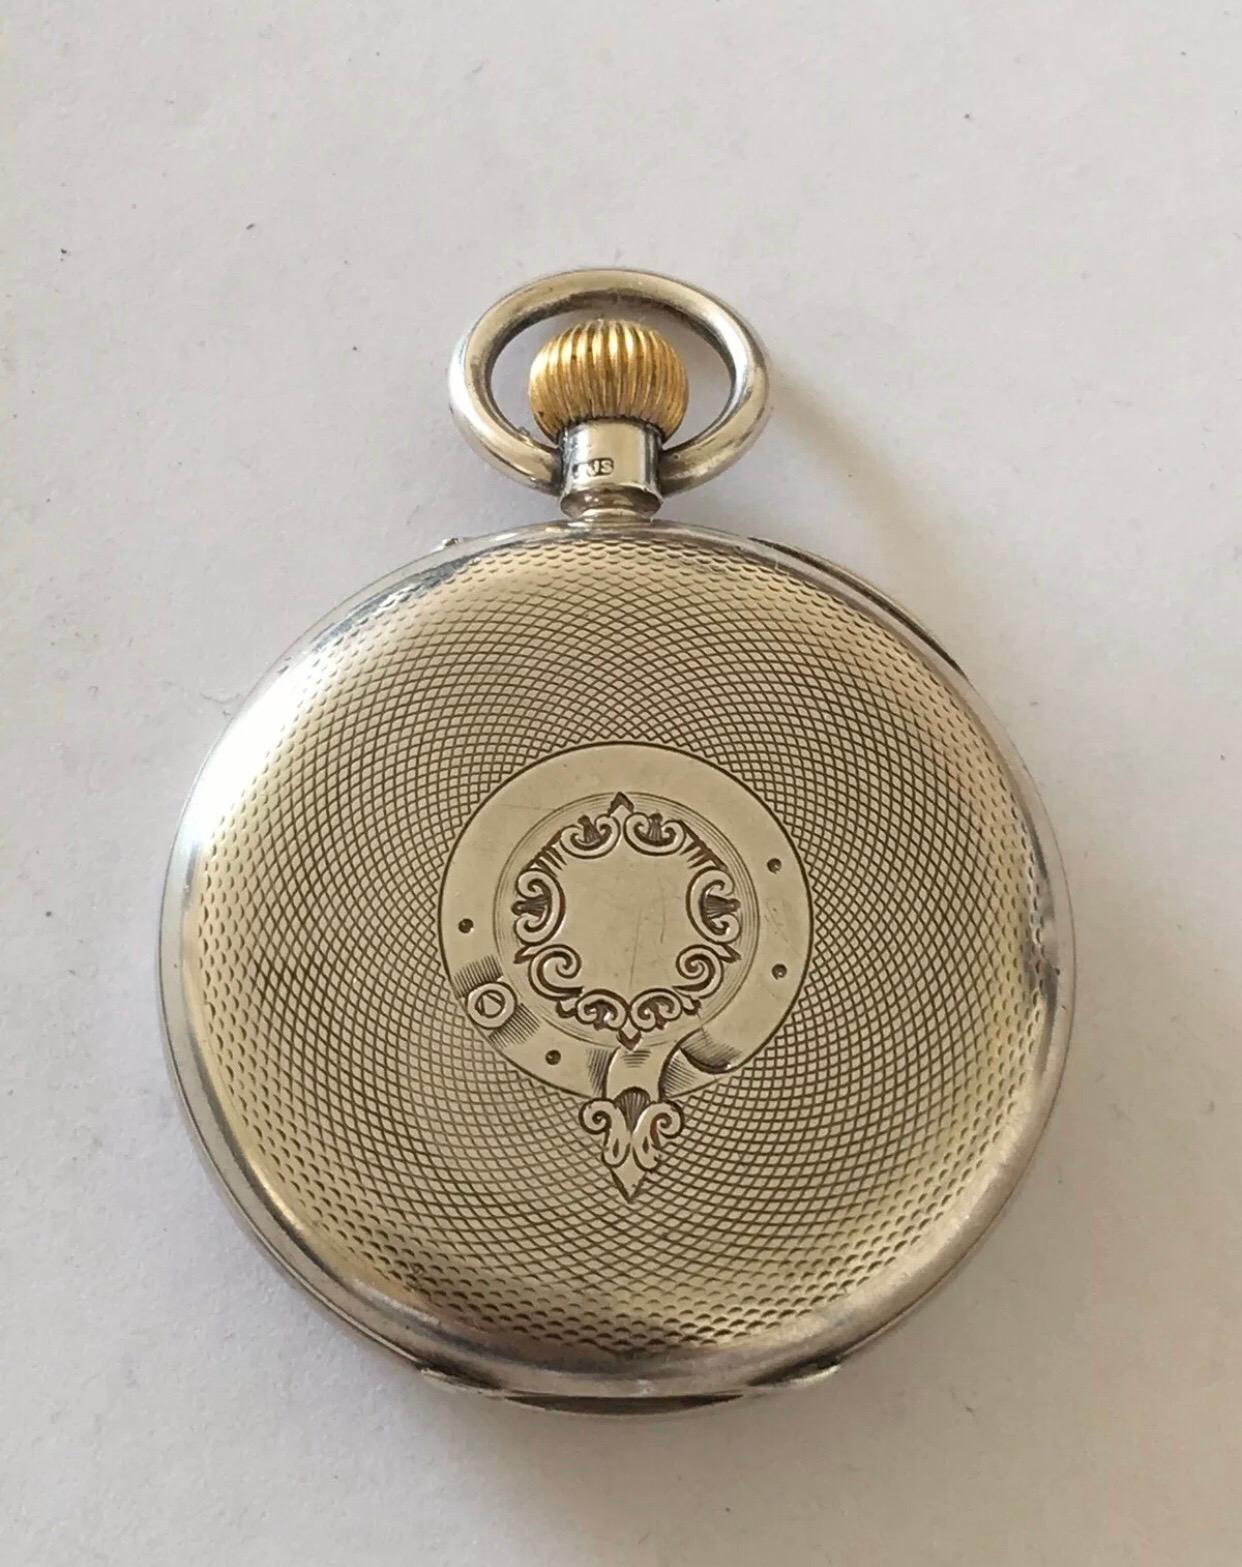 This exceptional quality silver hand winding( keyless ) mechanical pocket watch is in good working condition and is running well. Visible signs of ageing and wear with light surface marks on the case and on the glass. the watch measured 48mm